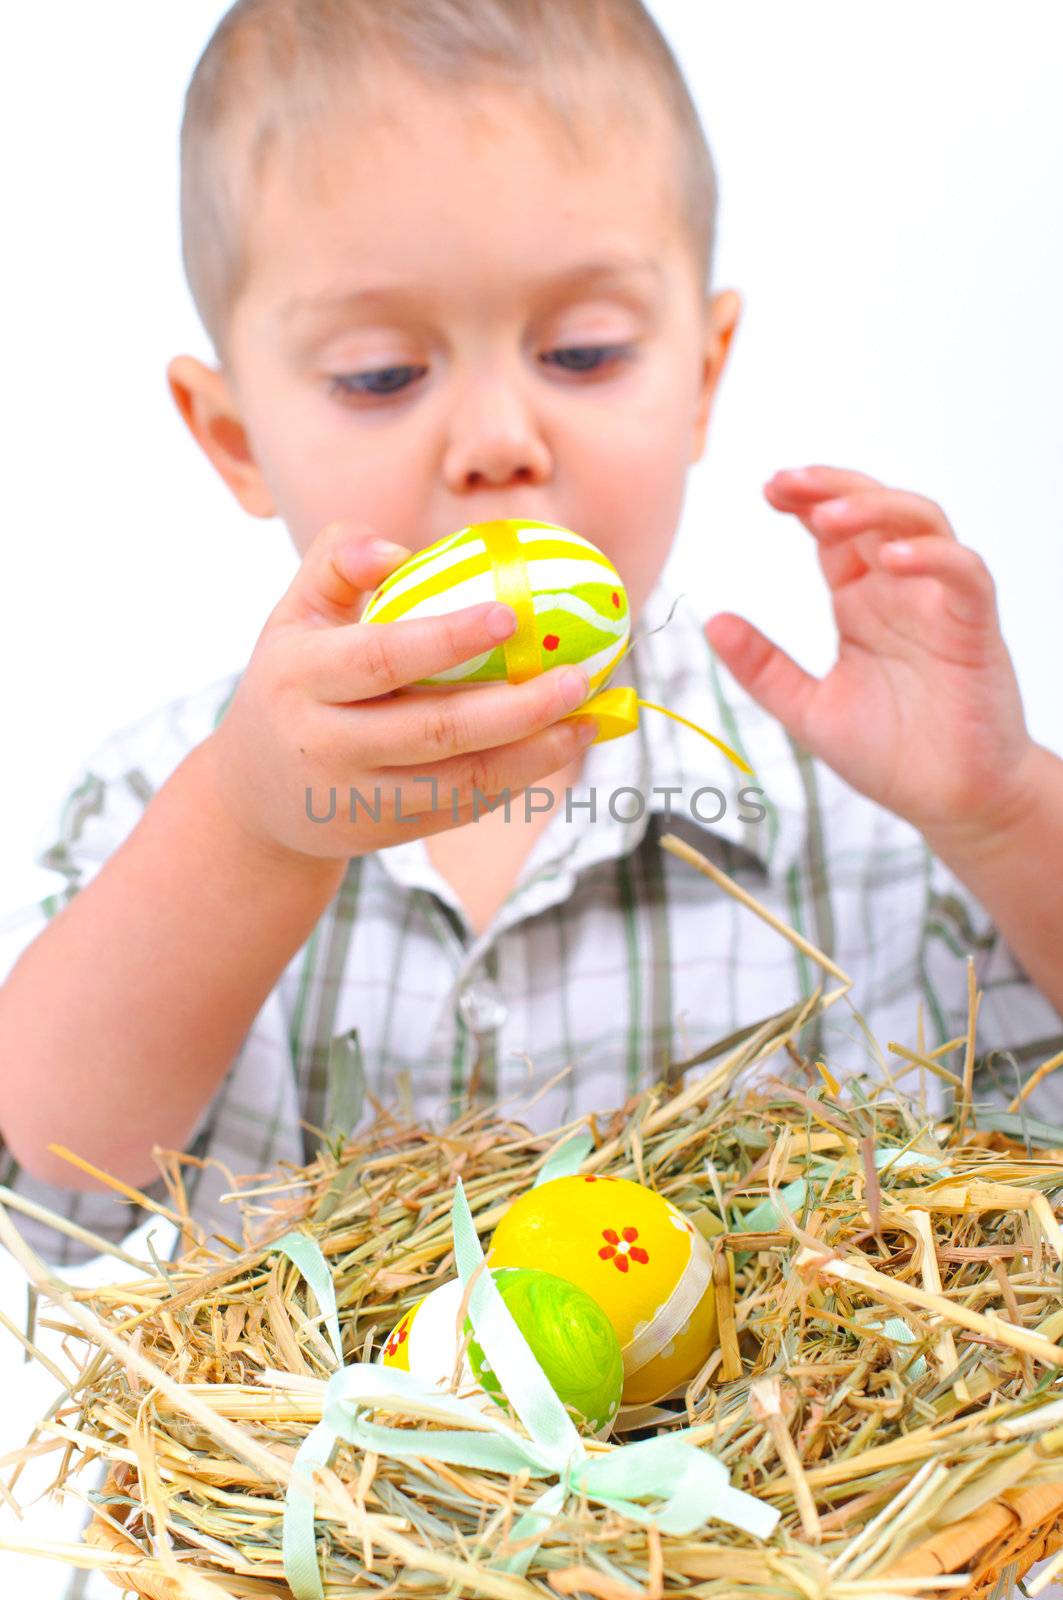 Little boy playing with easter eggs in basket. Focus on the eggs.